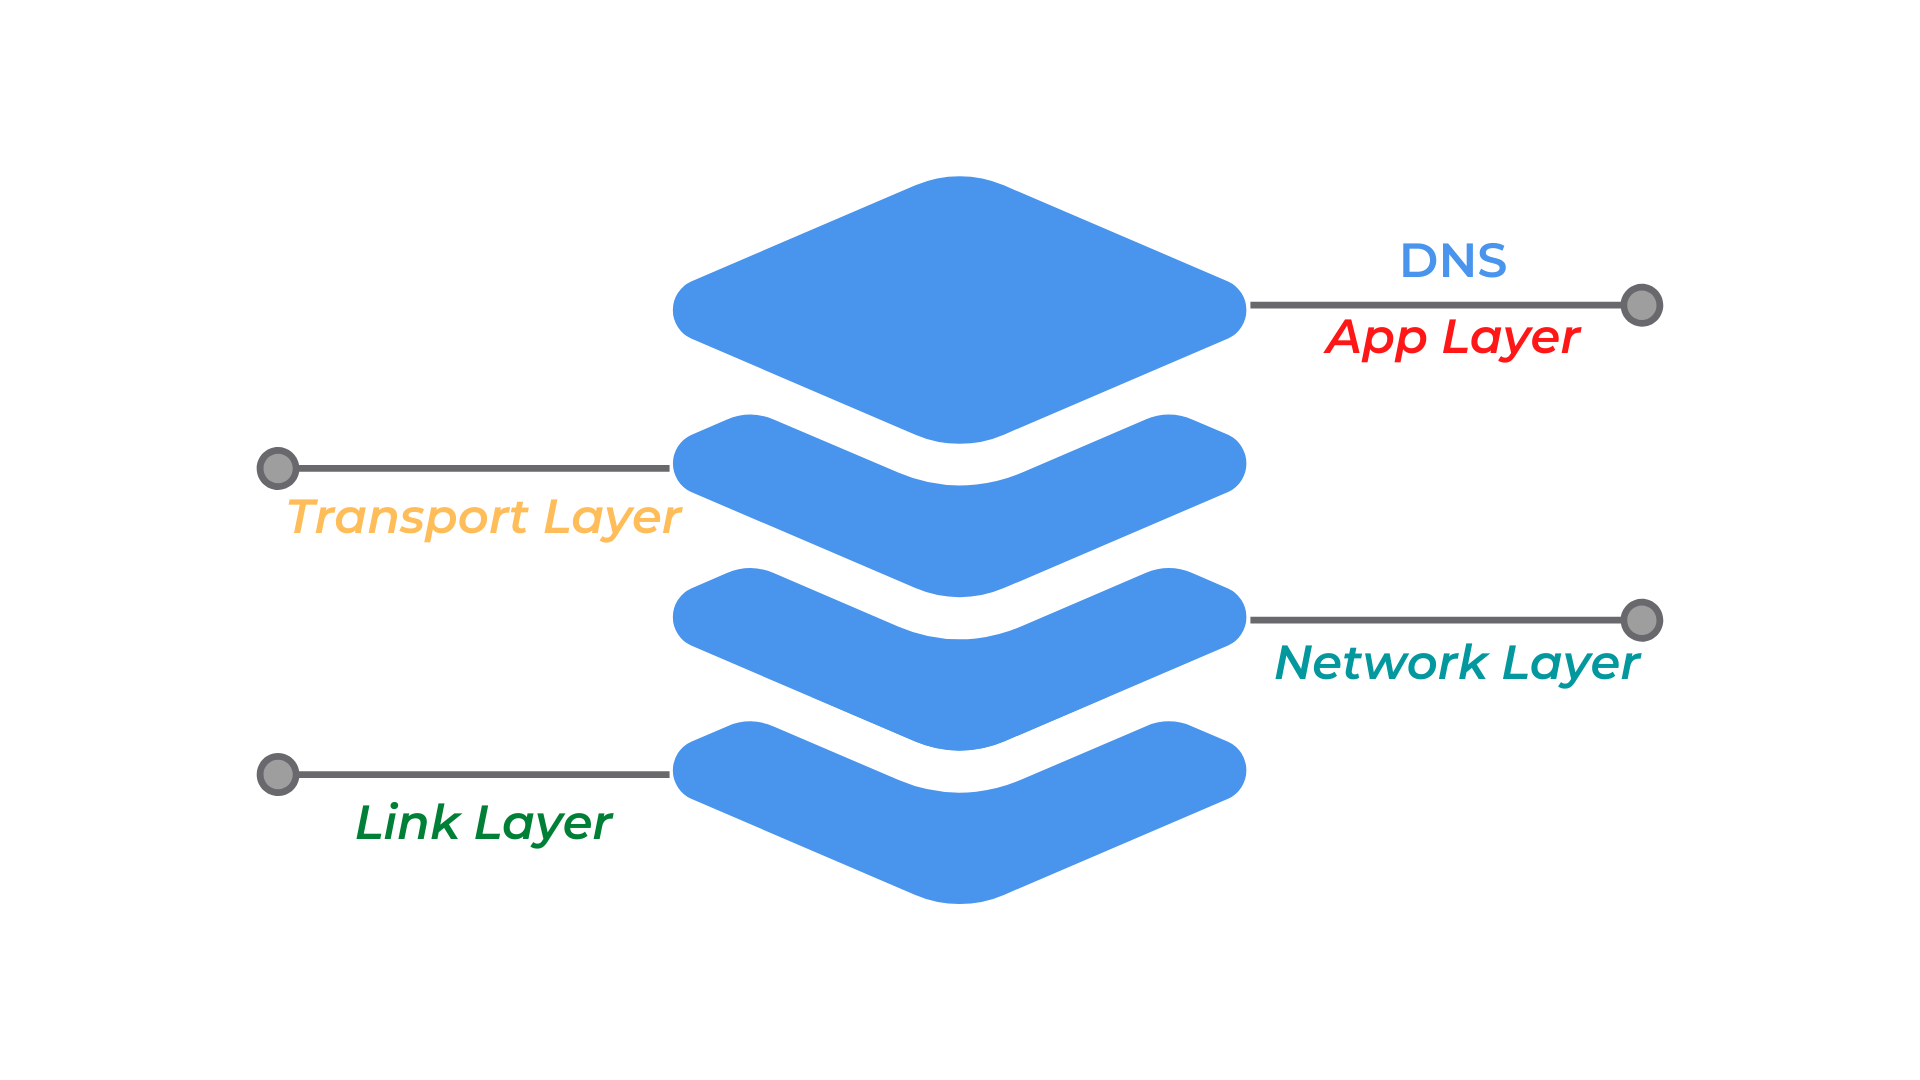 What Layer Is DNS?